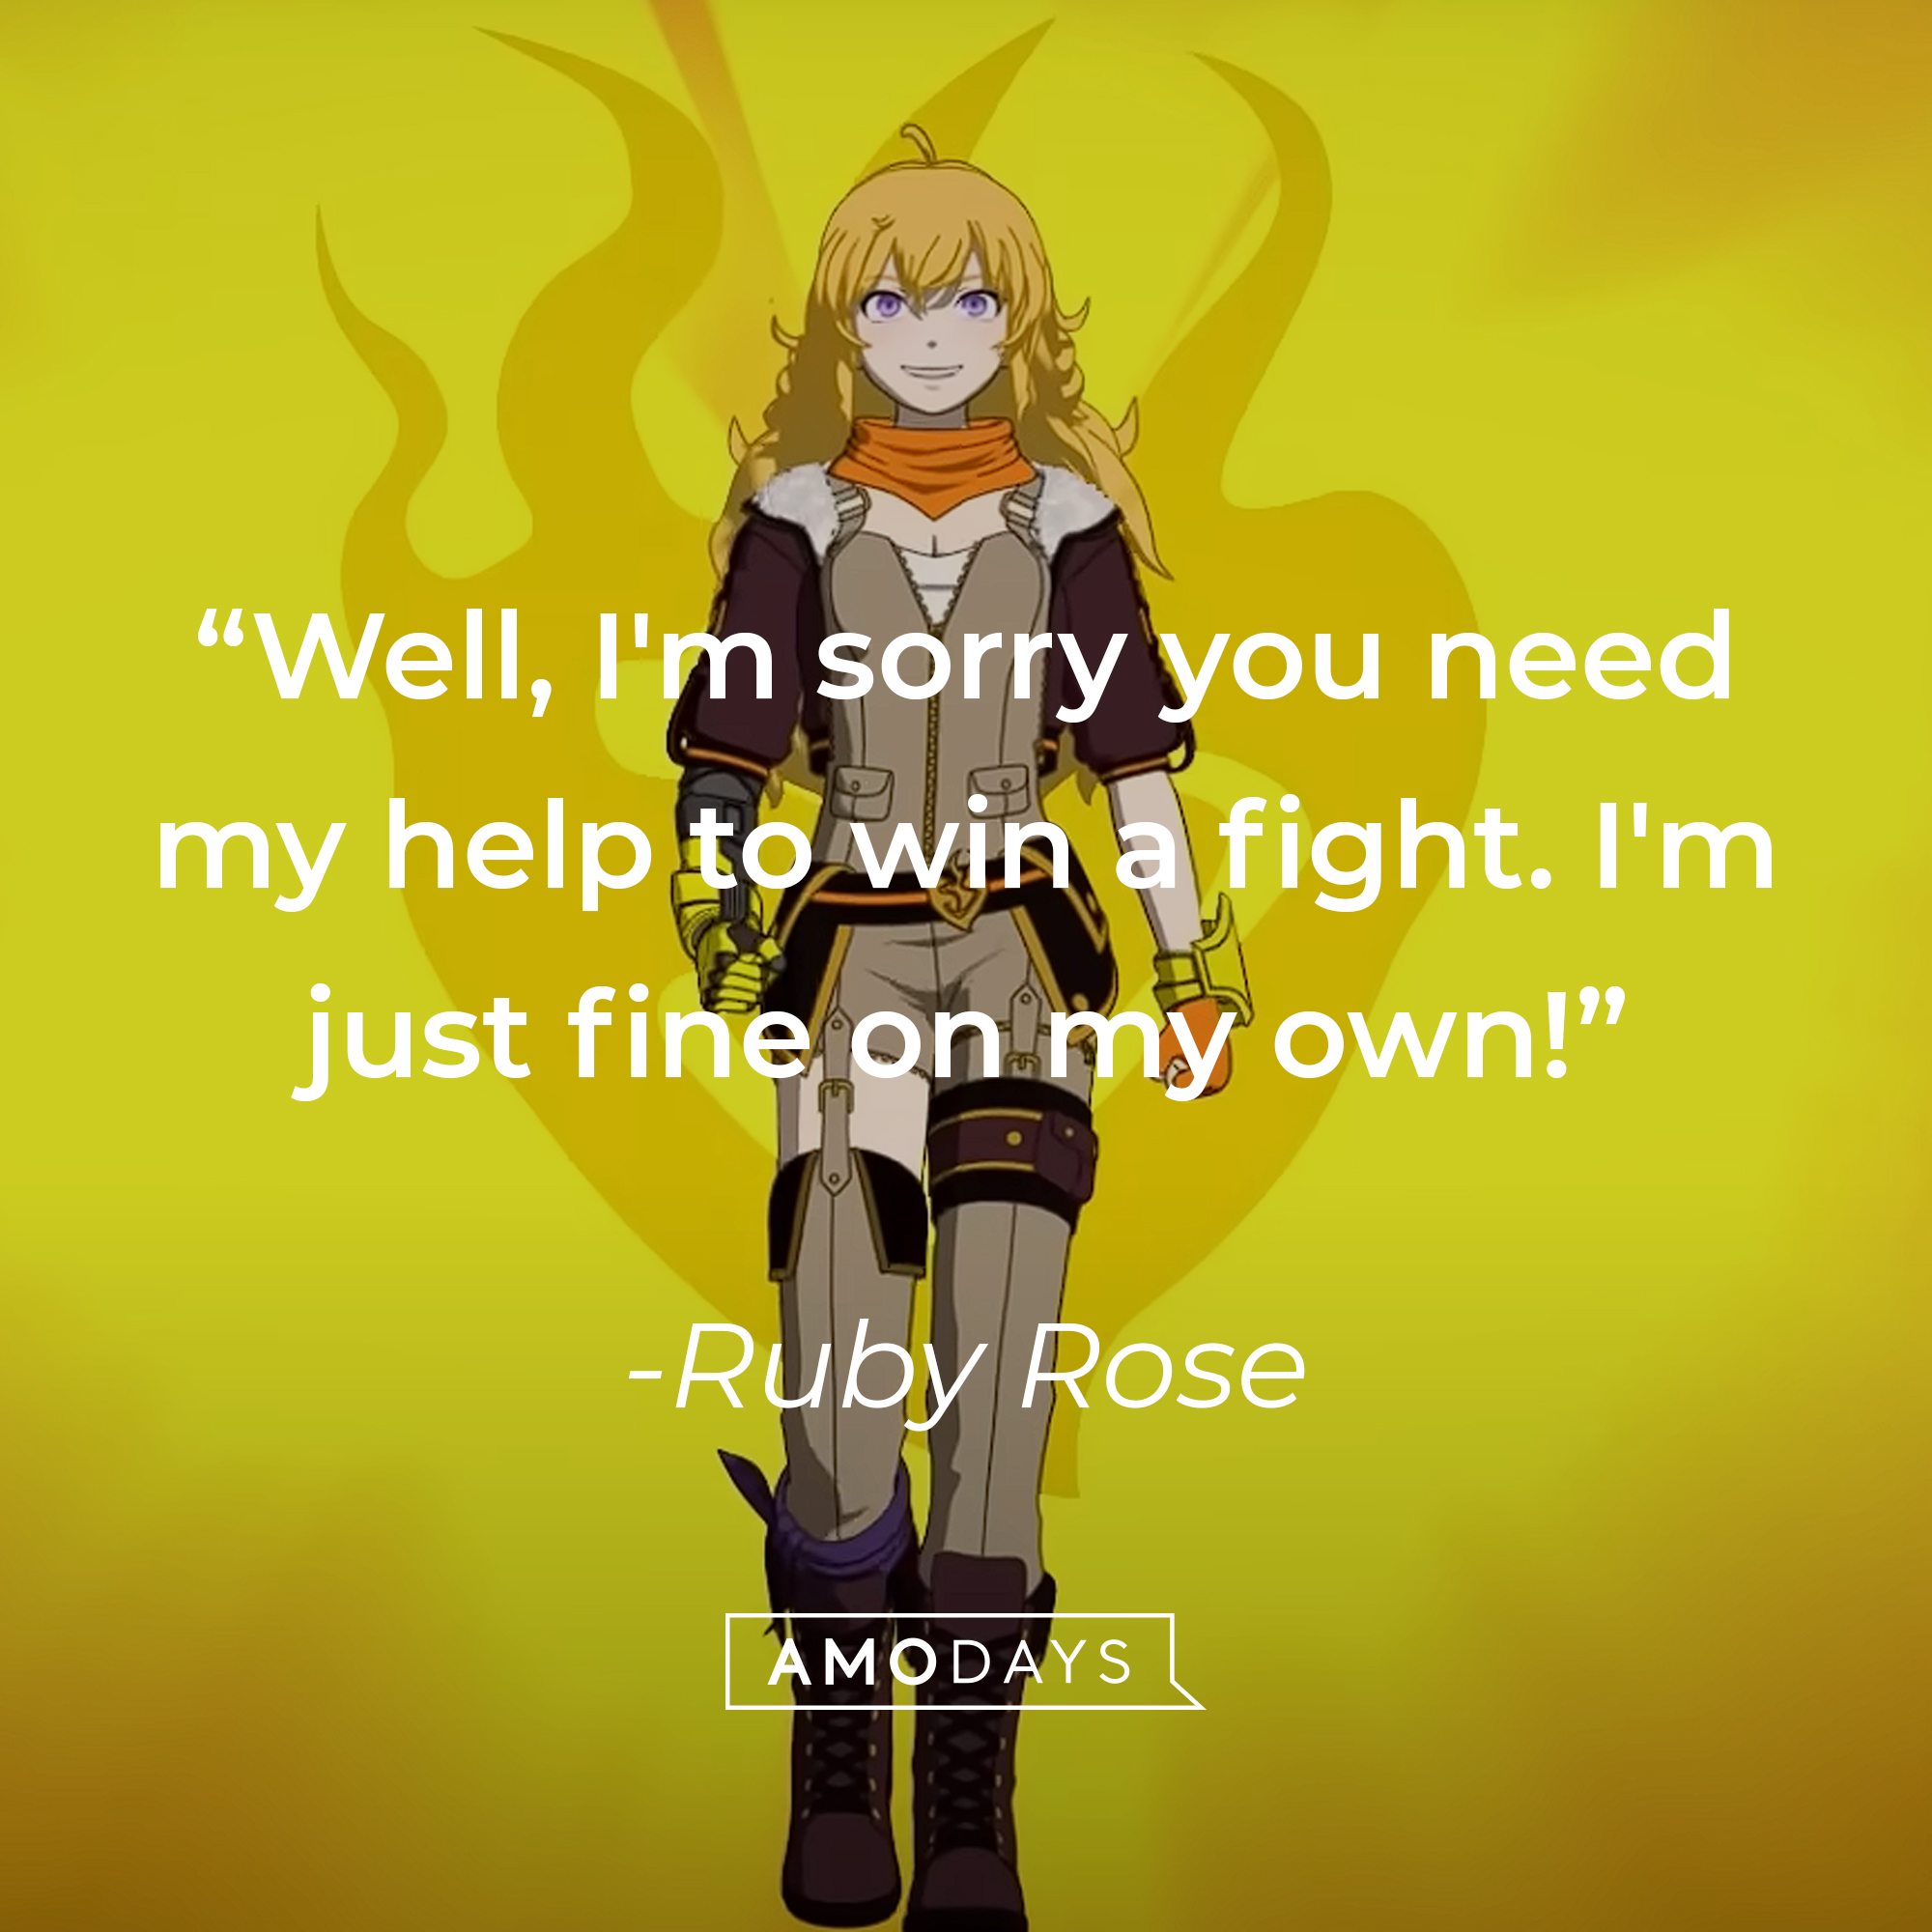 Ruby Rose's quote: "Well, I'm sorry you need my help to win a fight. I'm just fine on my own!" | Source: Youtube.com/crunchyrolldubs